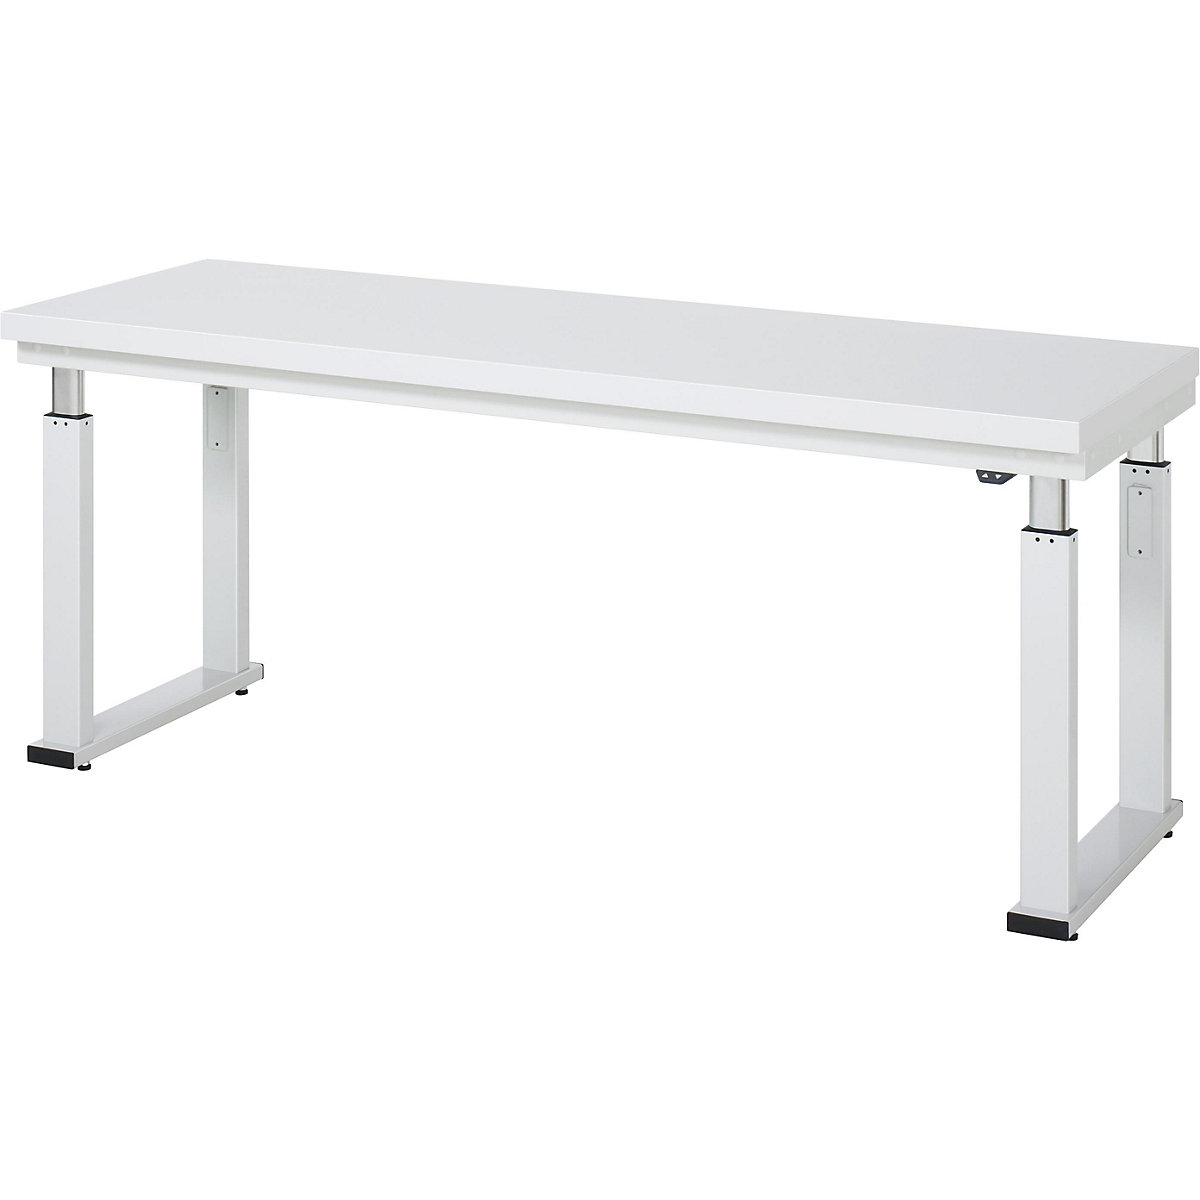 Work table, electric height adjustment – RAU, hardened laminate worktop, max. load 600 kg, WxD 2000 x 700 mm-12